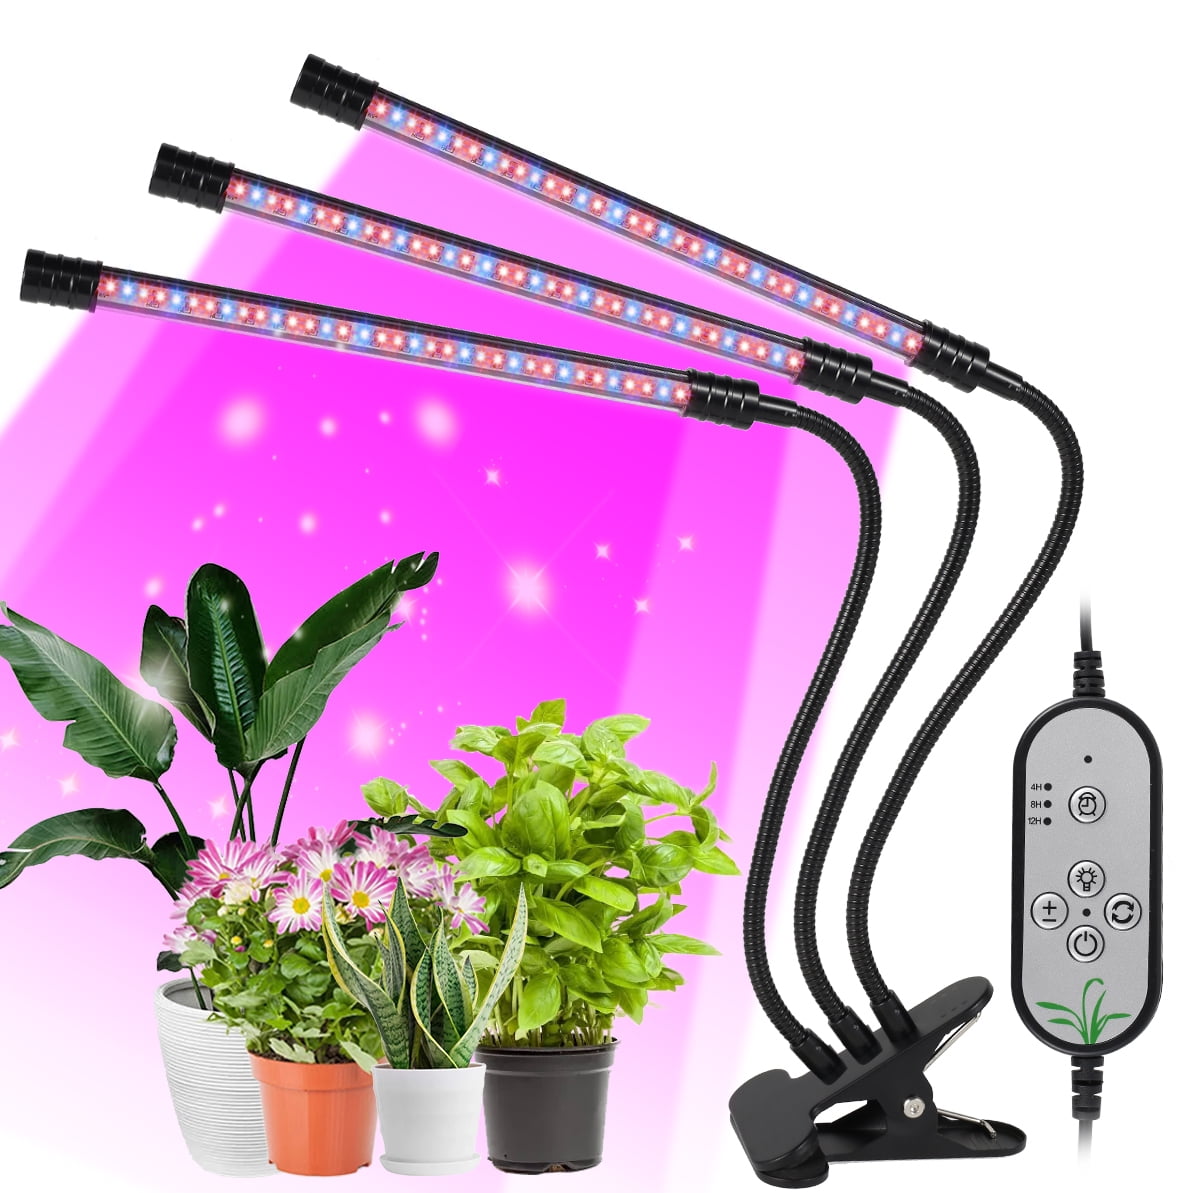 80W USB 4Heads 72LED Growth Light Full Spectrum Plant Grow Light With Clip Fo 